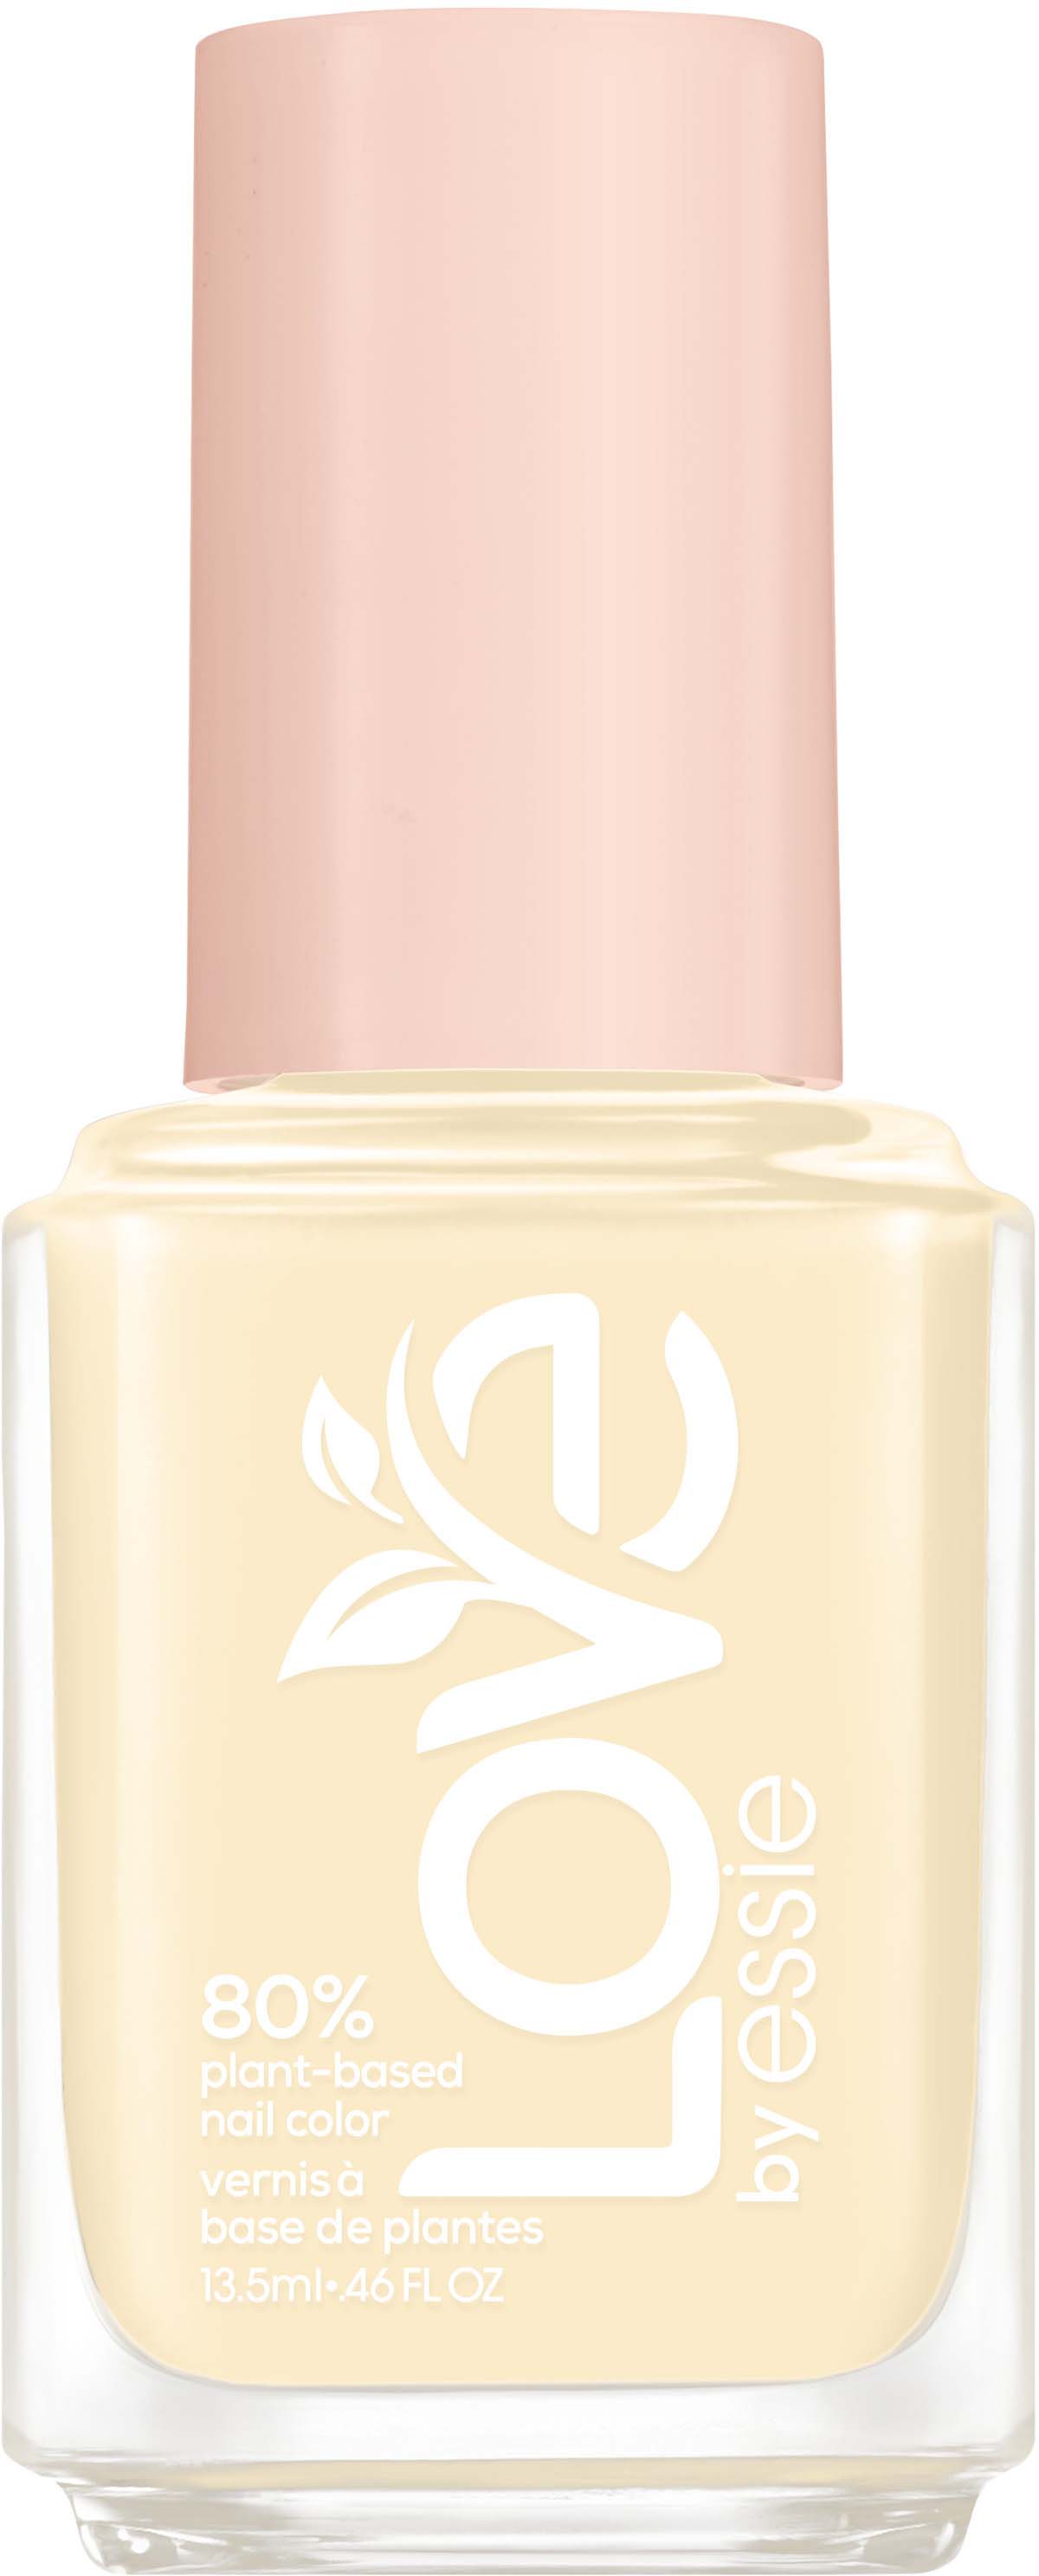 Essie LOVE by Color Brighter Essie Plant-based 80% Nail The Side 230 On